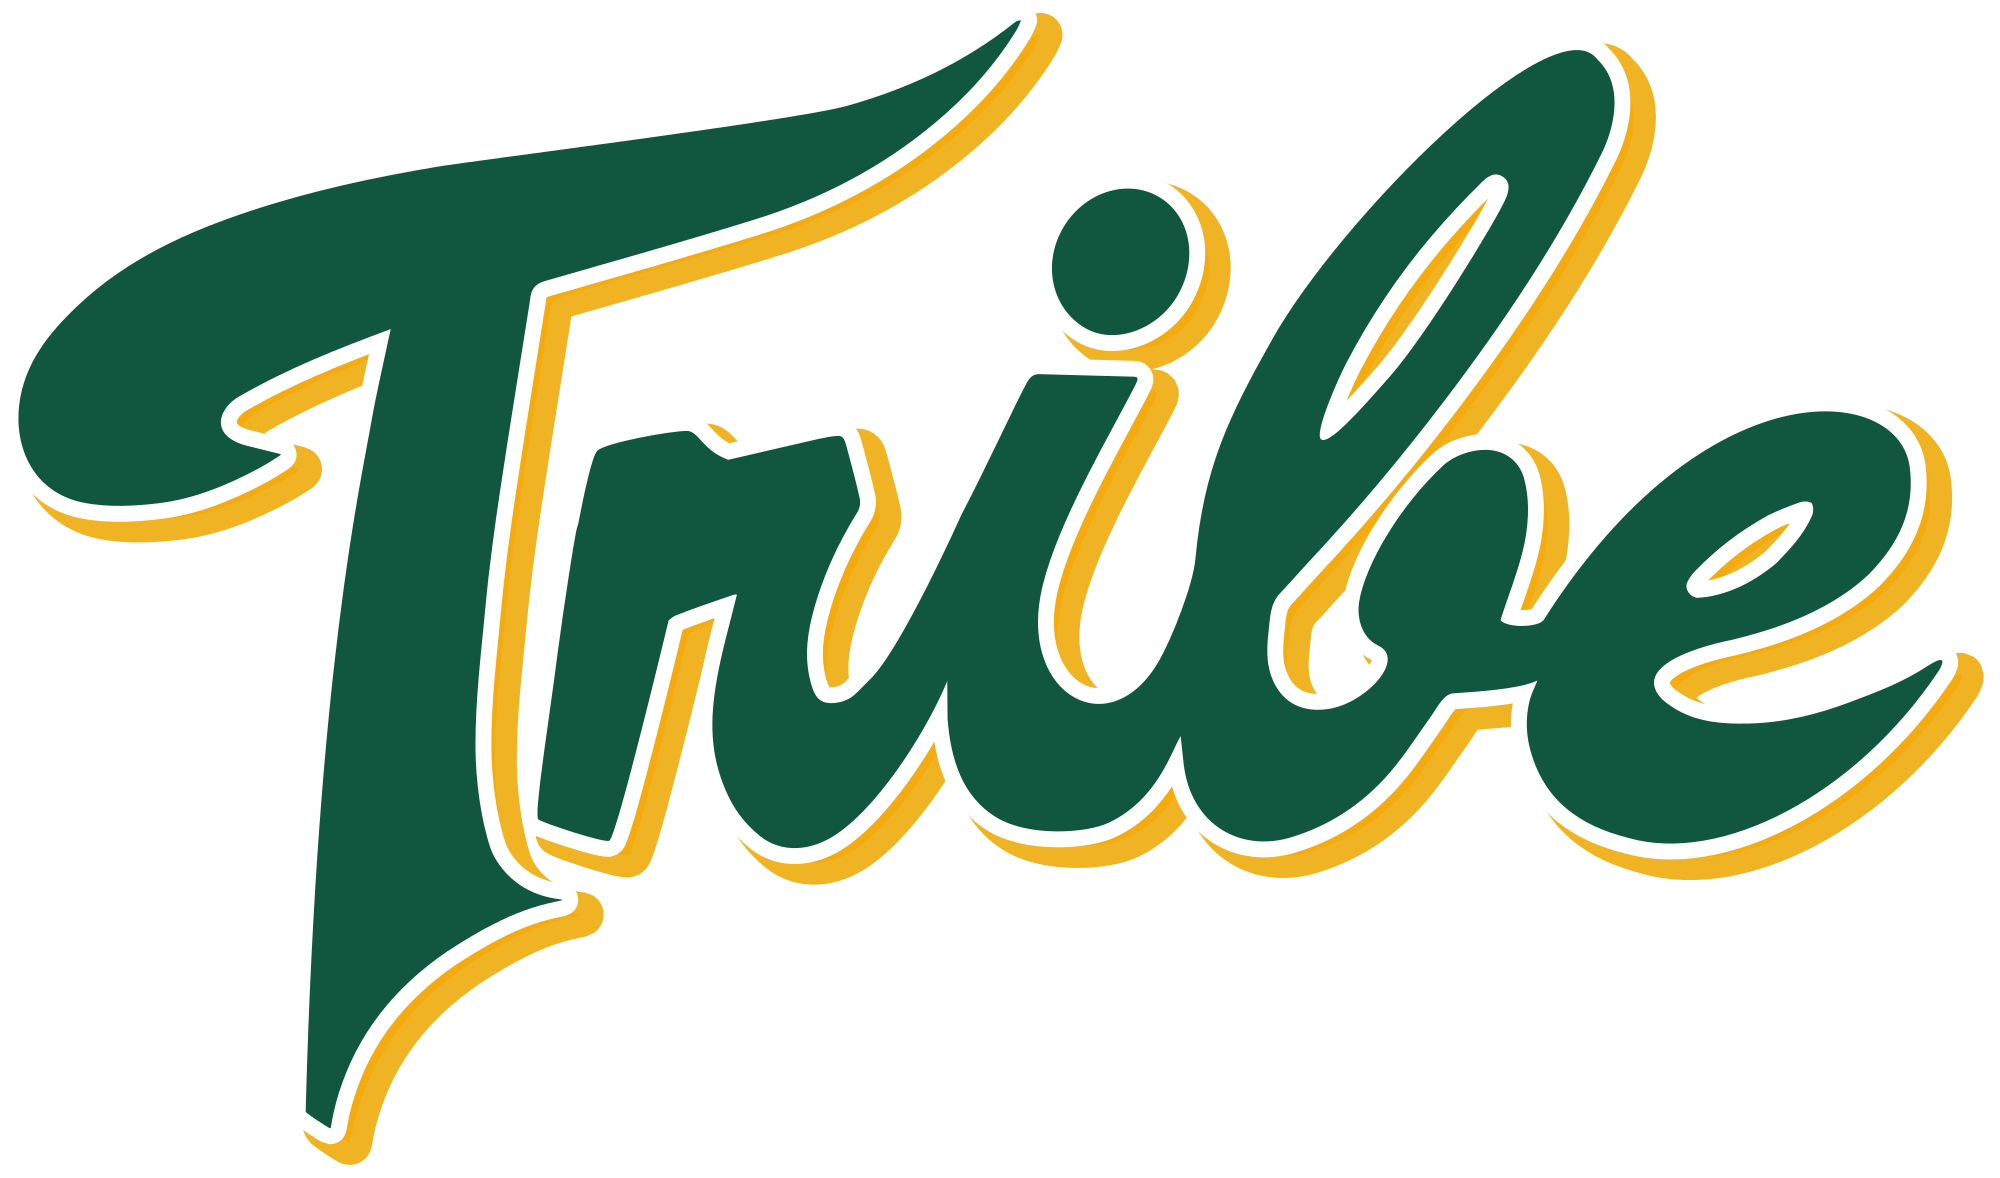 William and Mary Logo - File:William & Mary Tribe logo.svg - Wikimedia Commons